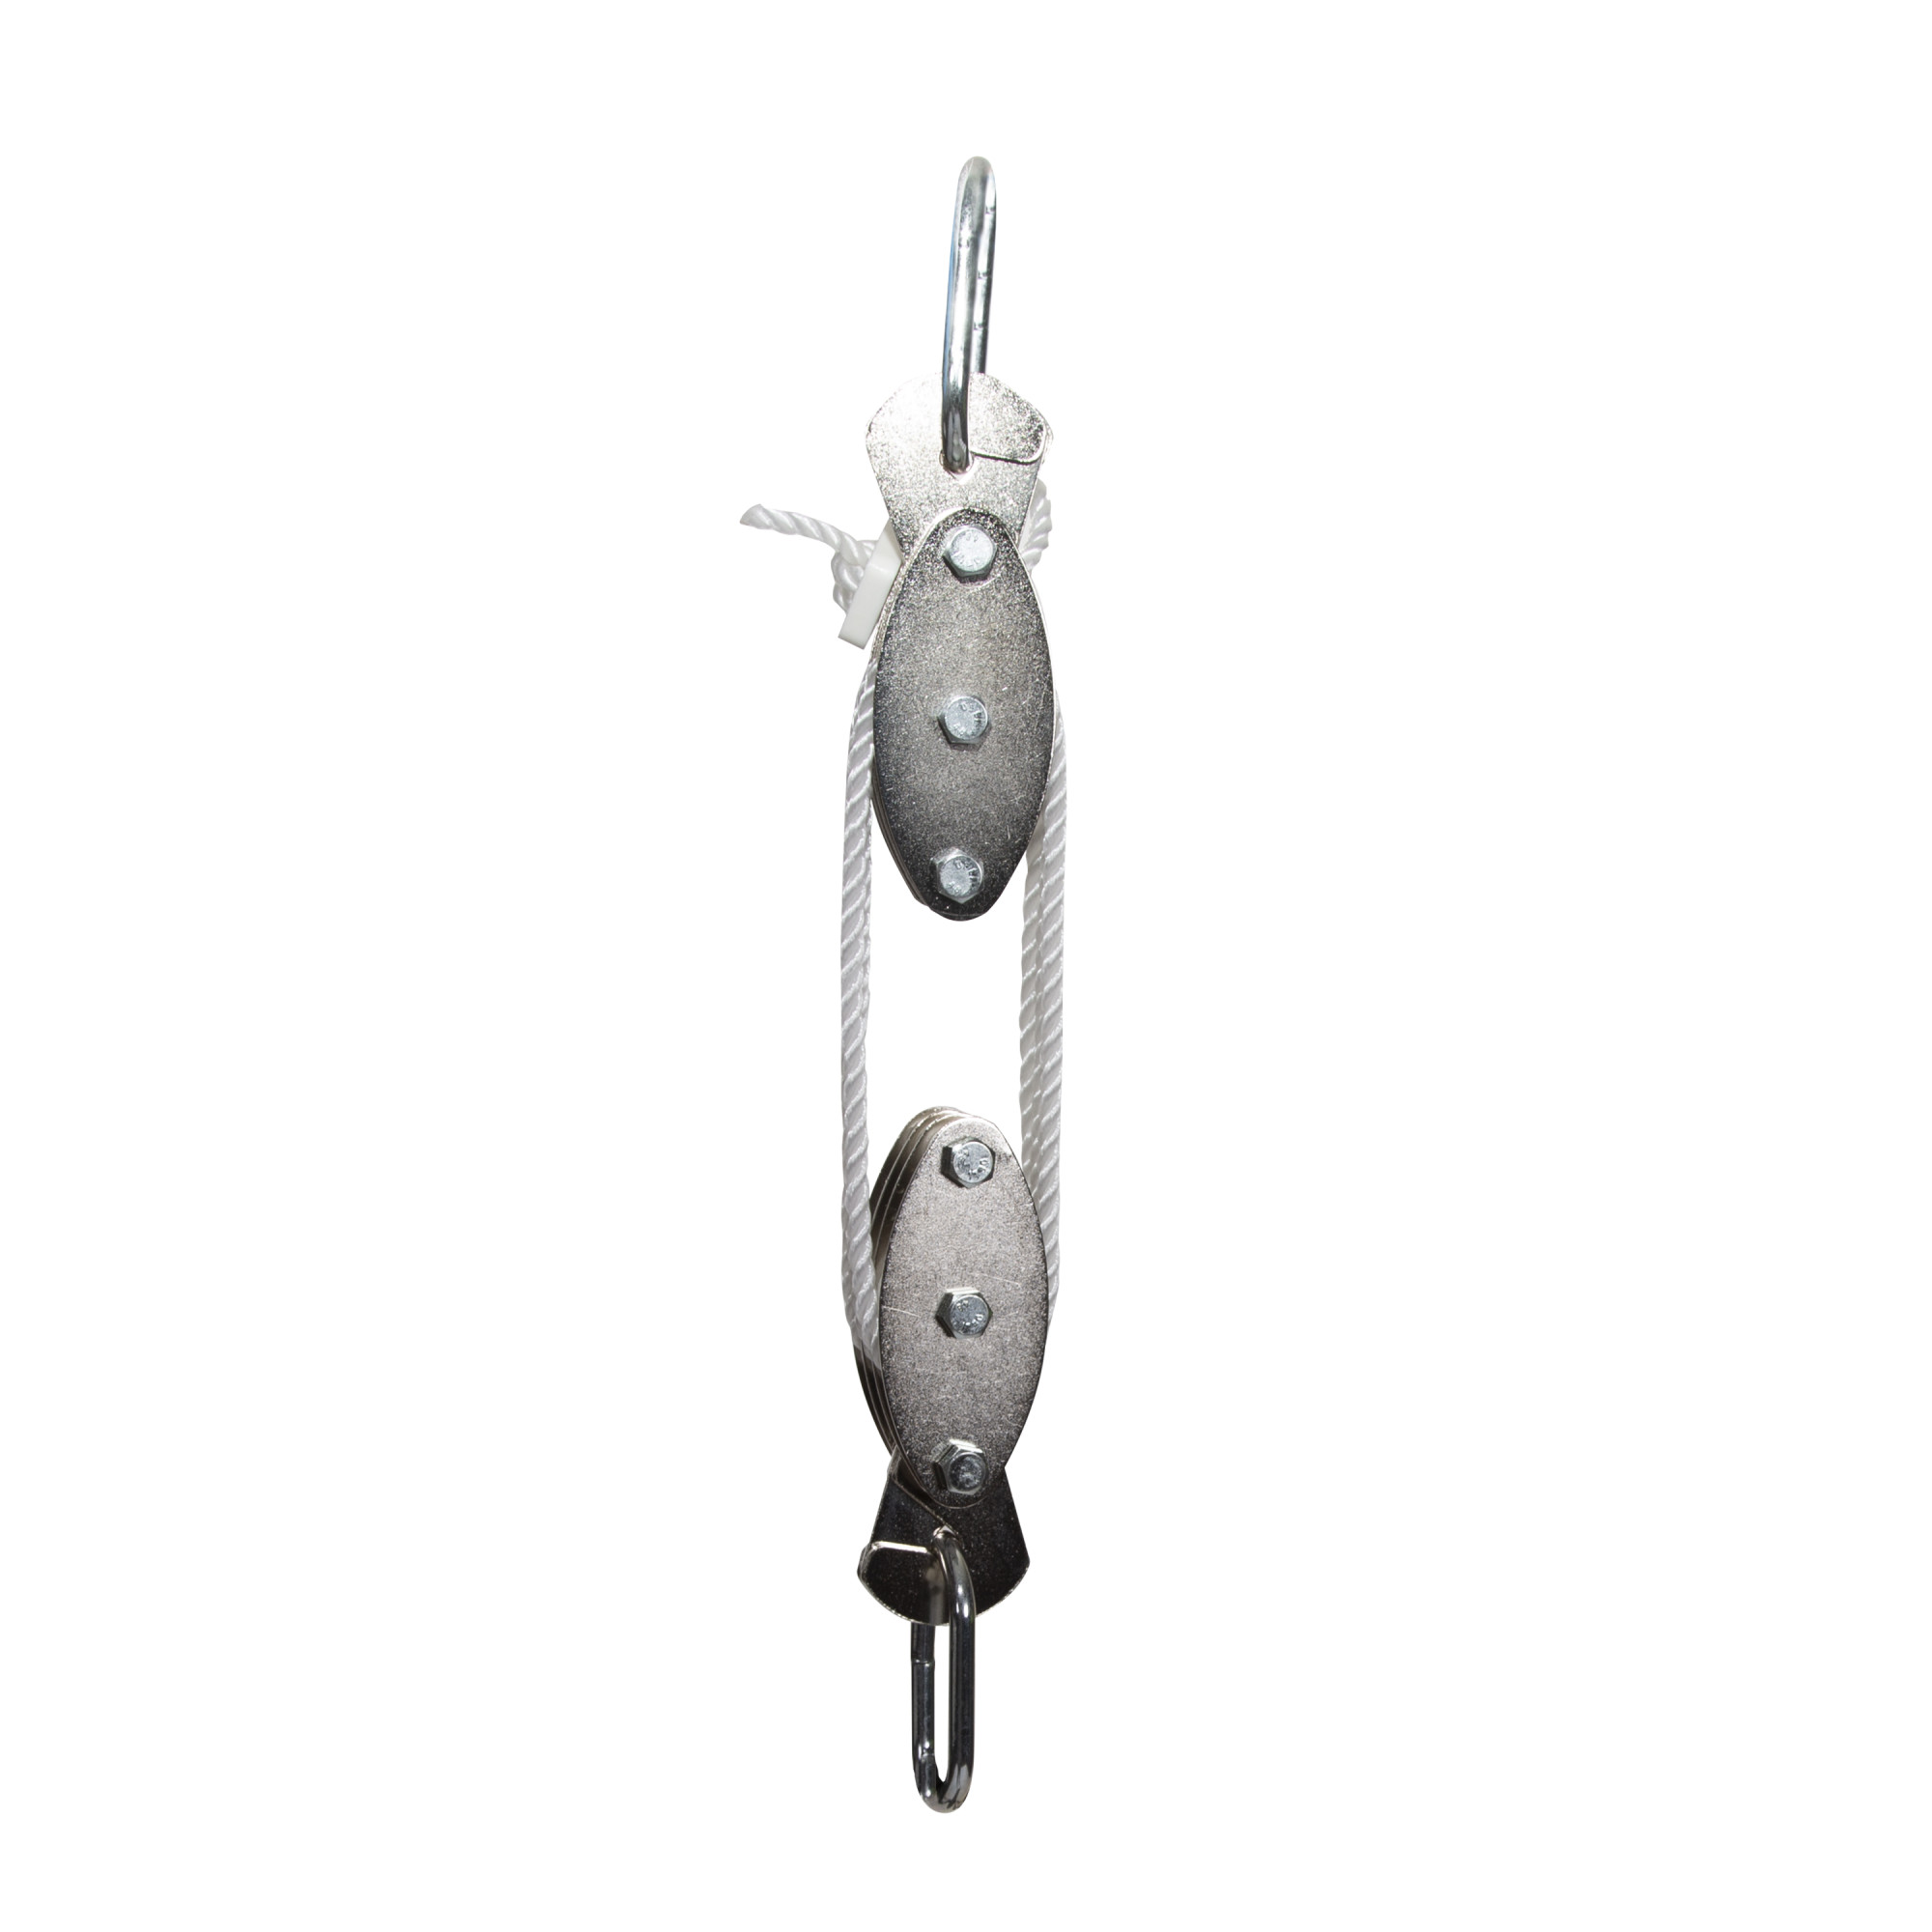 Stansport Indoor and Outdoor Pulley Hoist 440 lbs - image 1 of 7